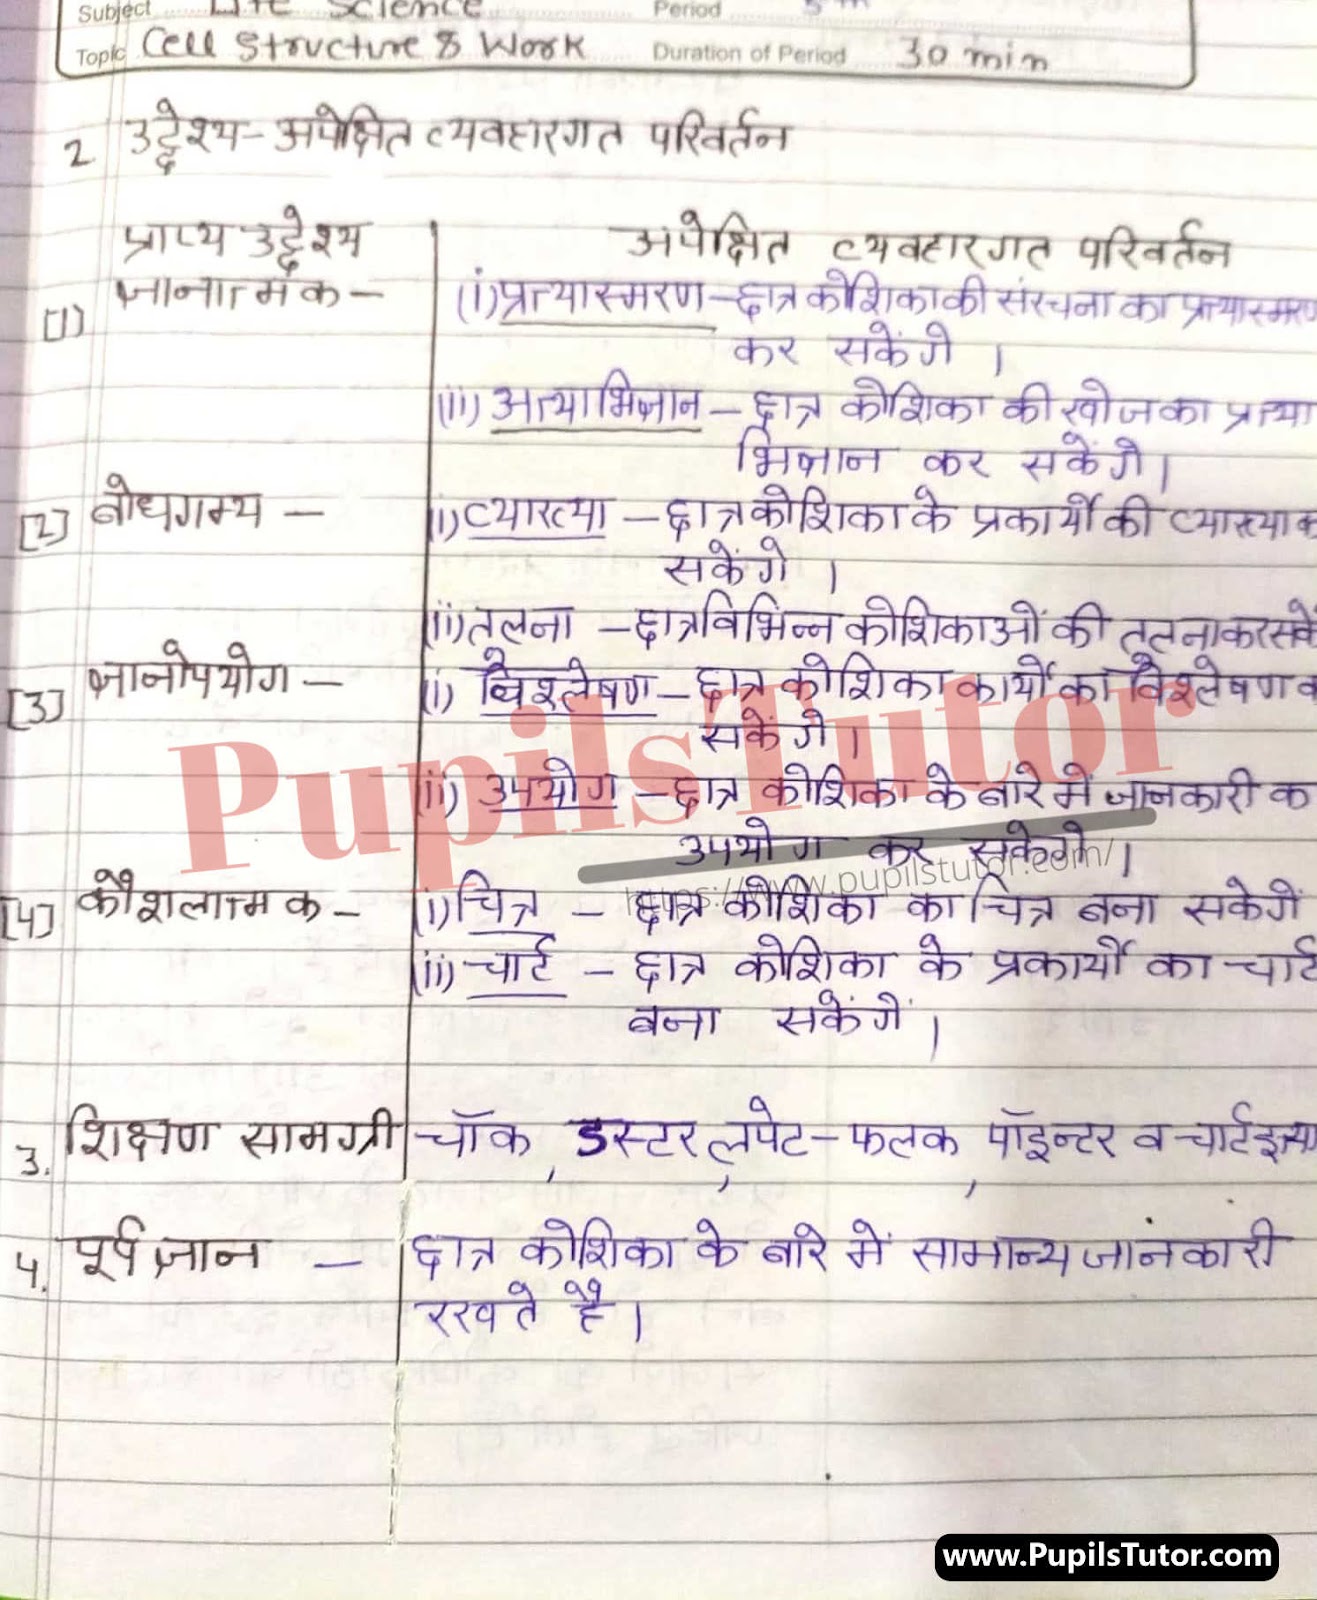 Koshika Ki Sanrachna Evam Karya Lesson Plan | Structure And Function Of The Cell Lesson Plan In Hindi For Class 8 – (Page And Image Number 1) – Pupils Tutor